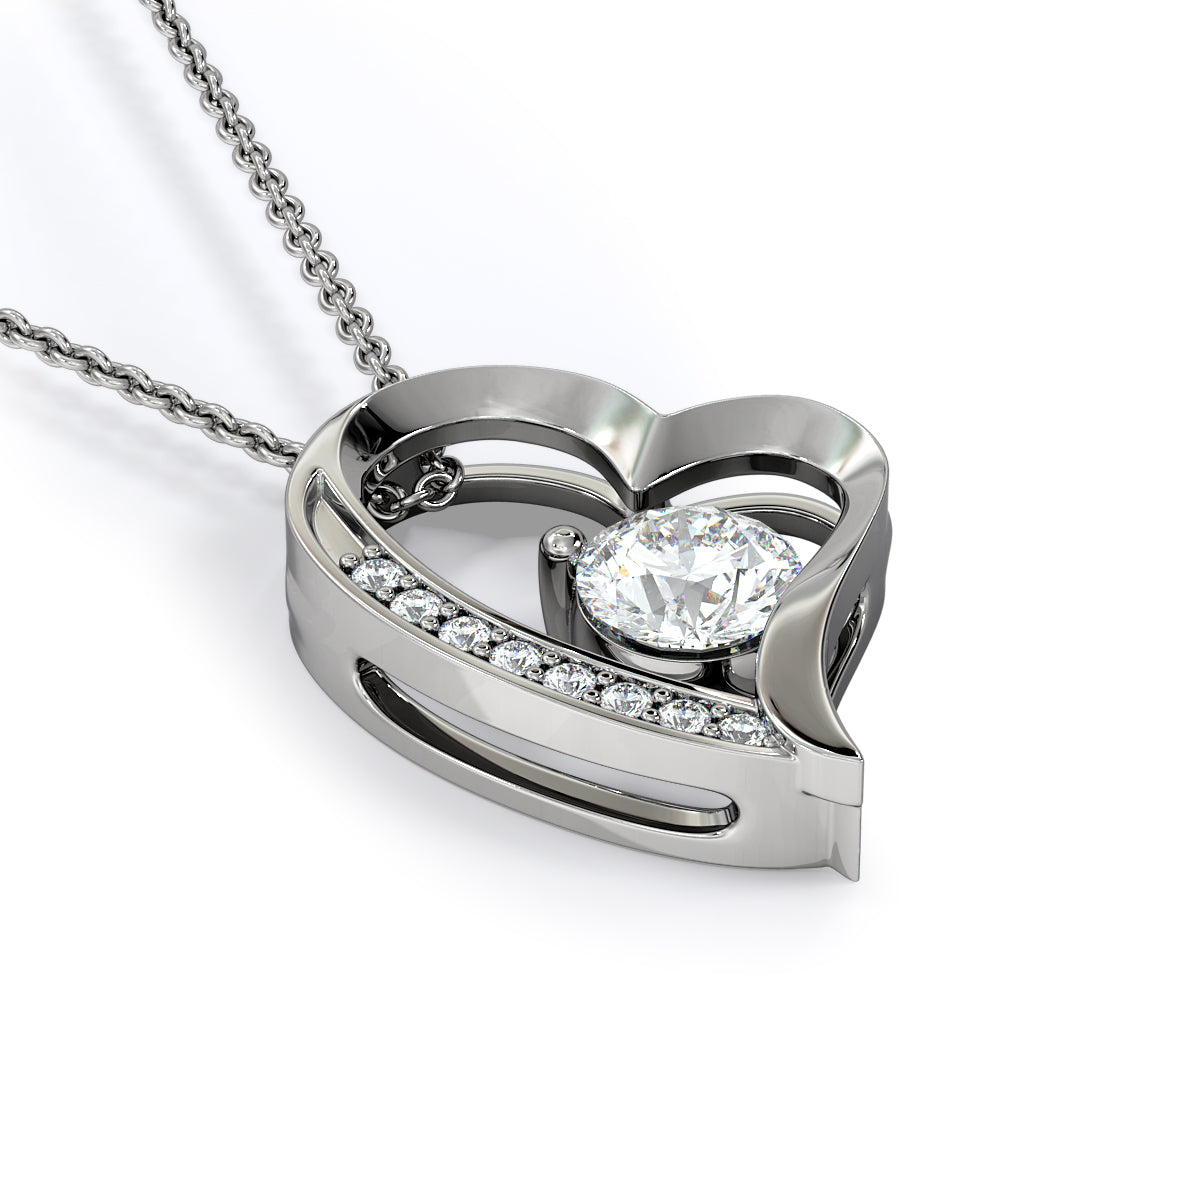 To My Wife - You'Re My Special Person - 925 Sterling Silver Pendant